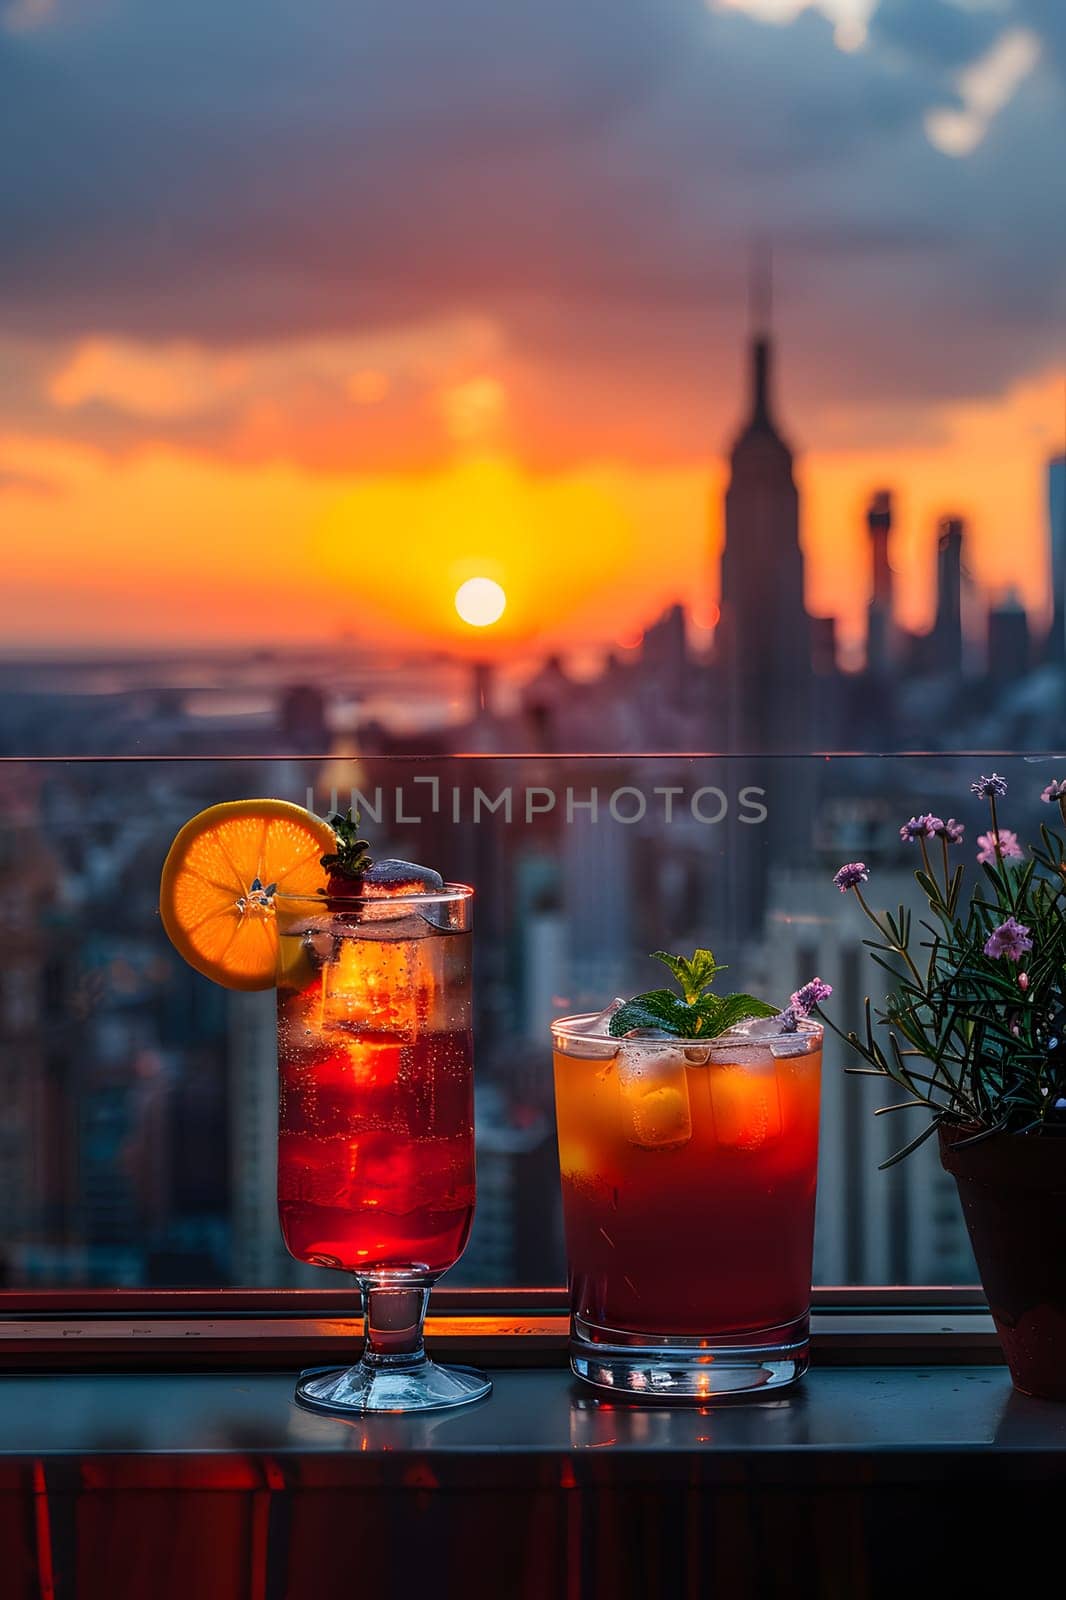 Two drinks are elegantly placed on a table overlooking the city during a stunning sunset with a red sky at morning. The liquid reflects the orange hues of the sky, creating a magical afterglow